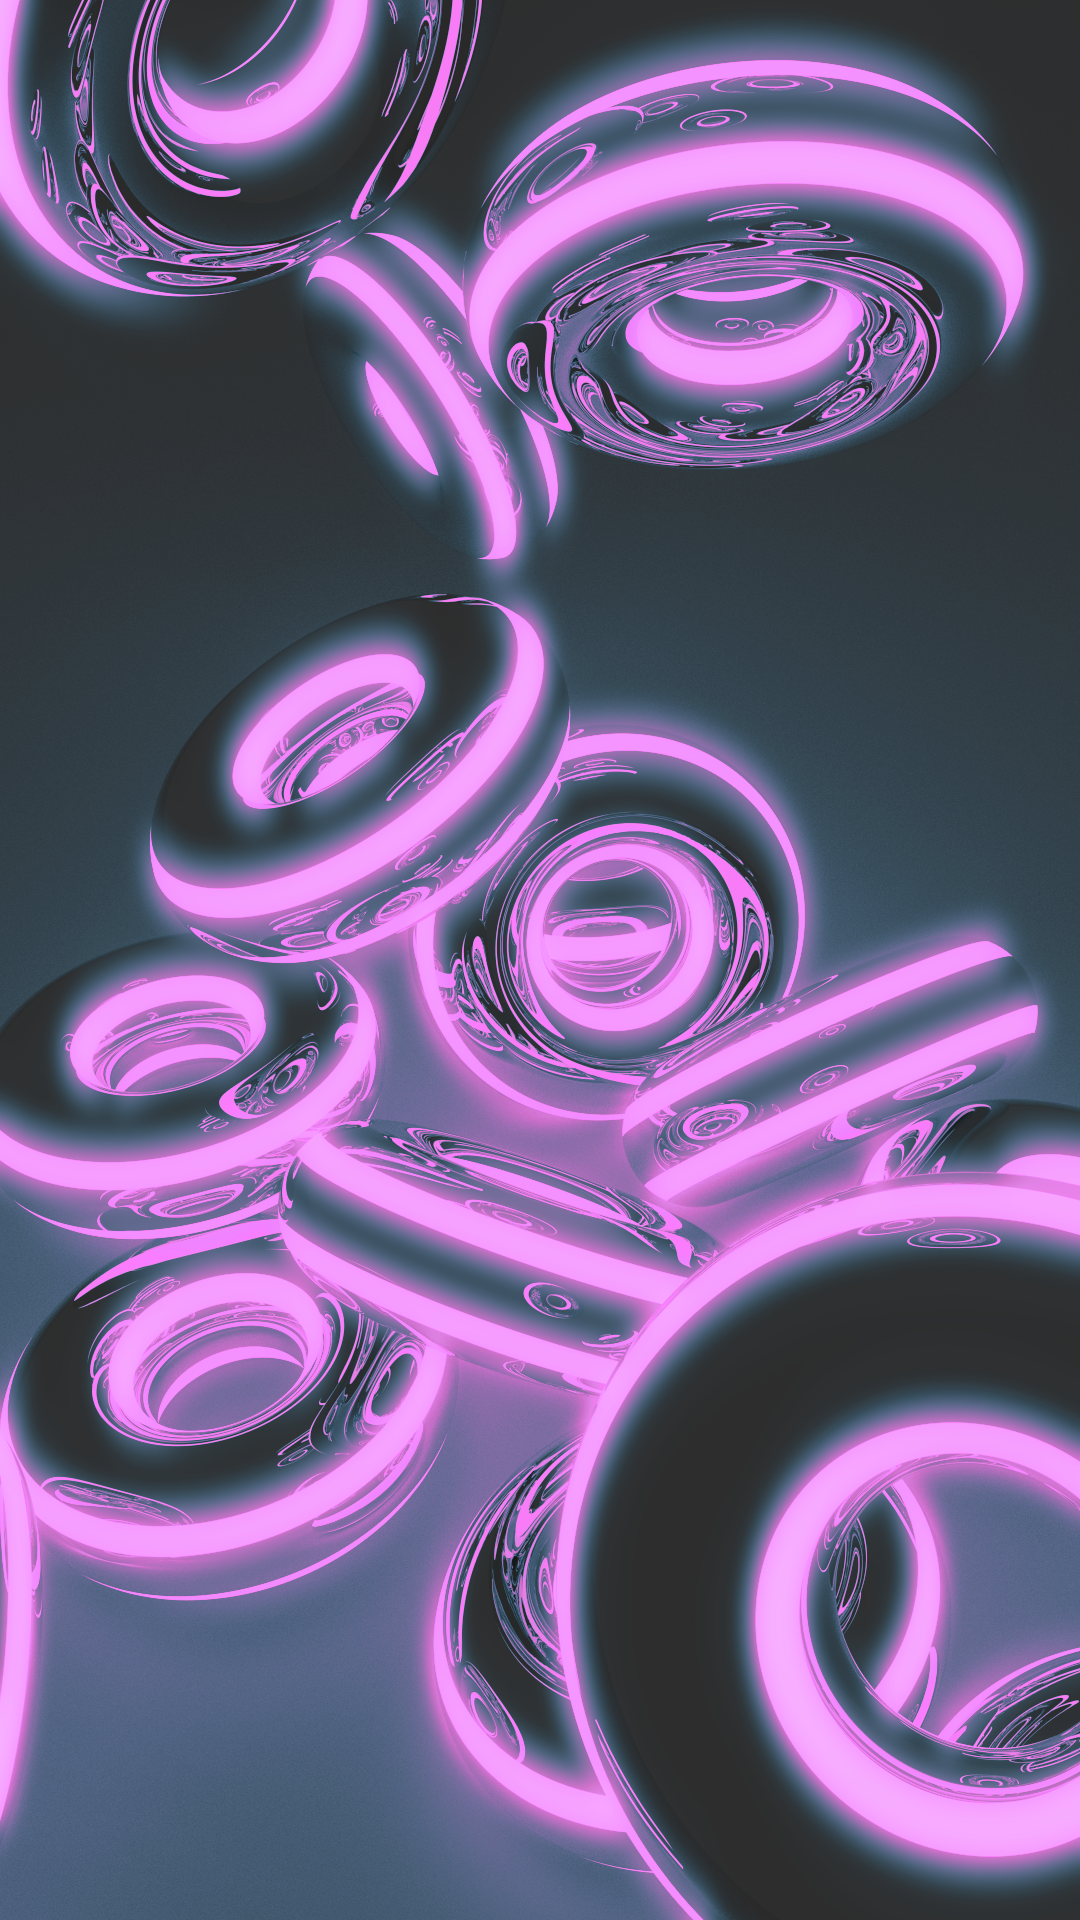 Galaxy S4 Wallpaper Pink Neon Donuts Android